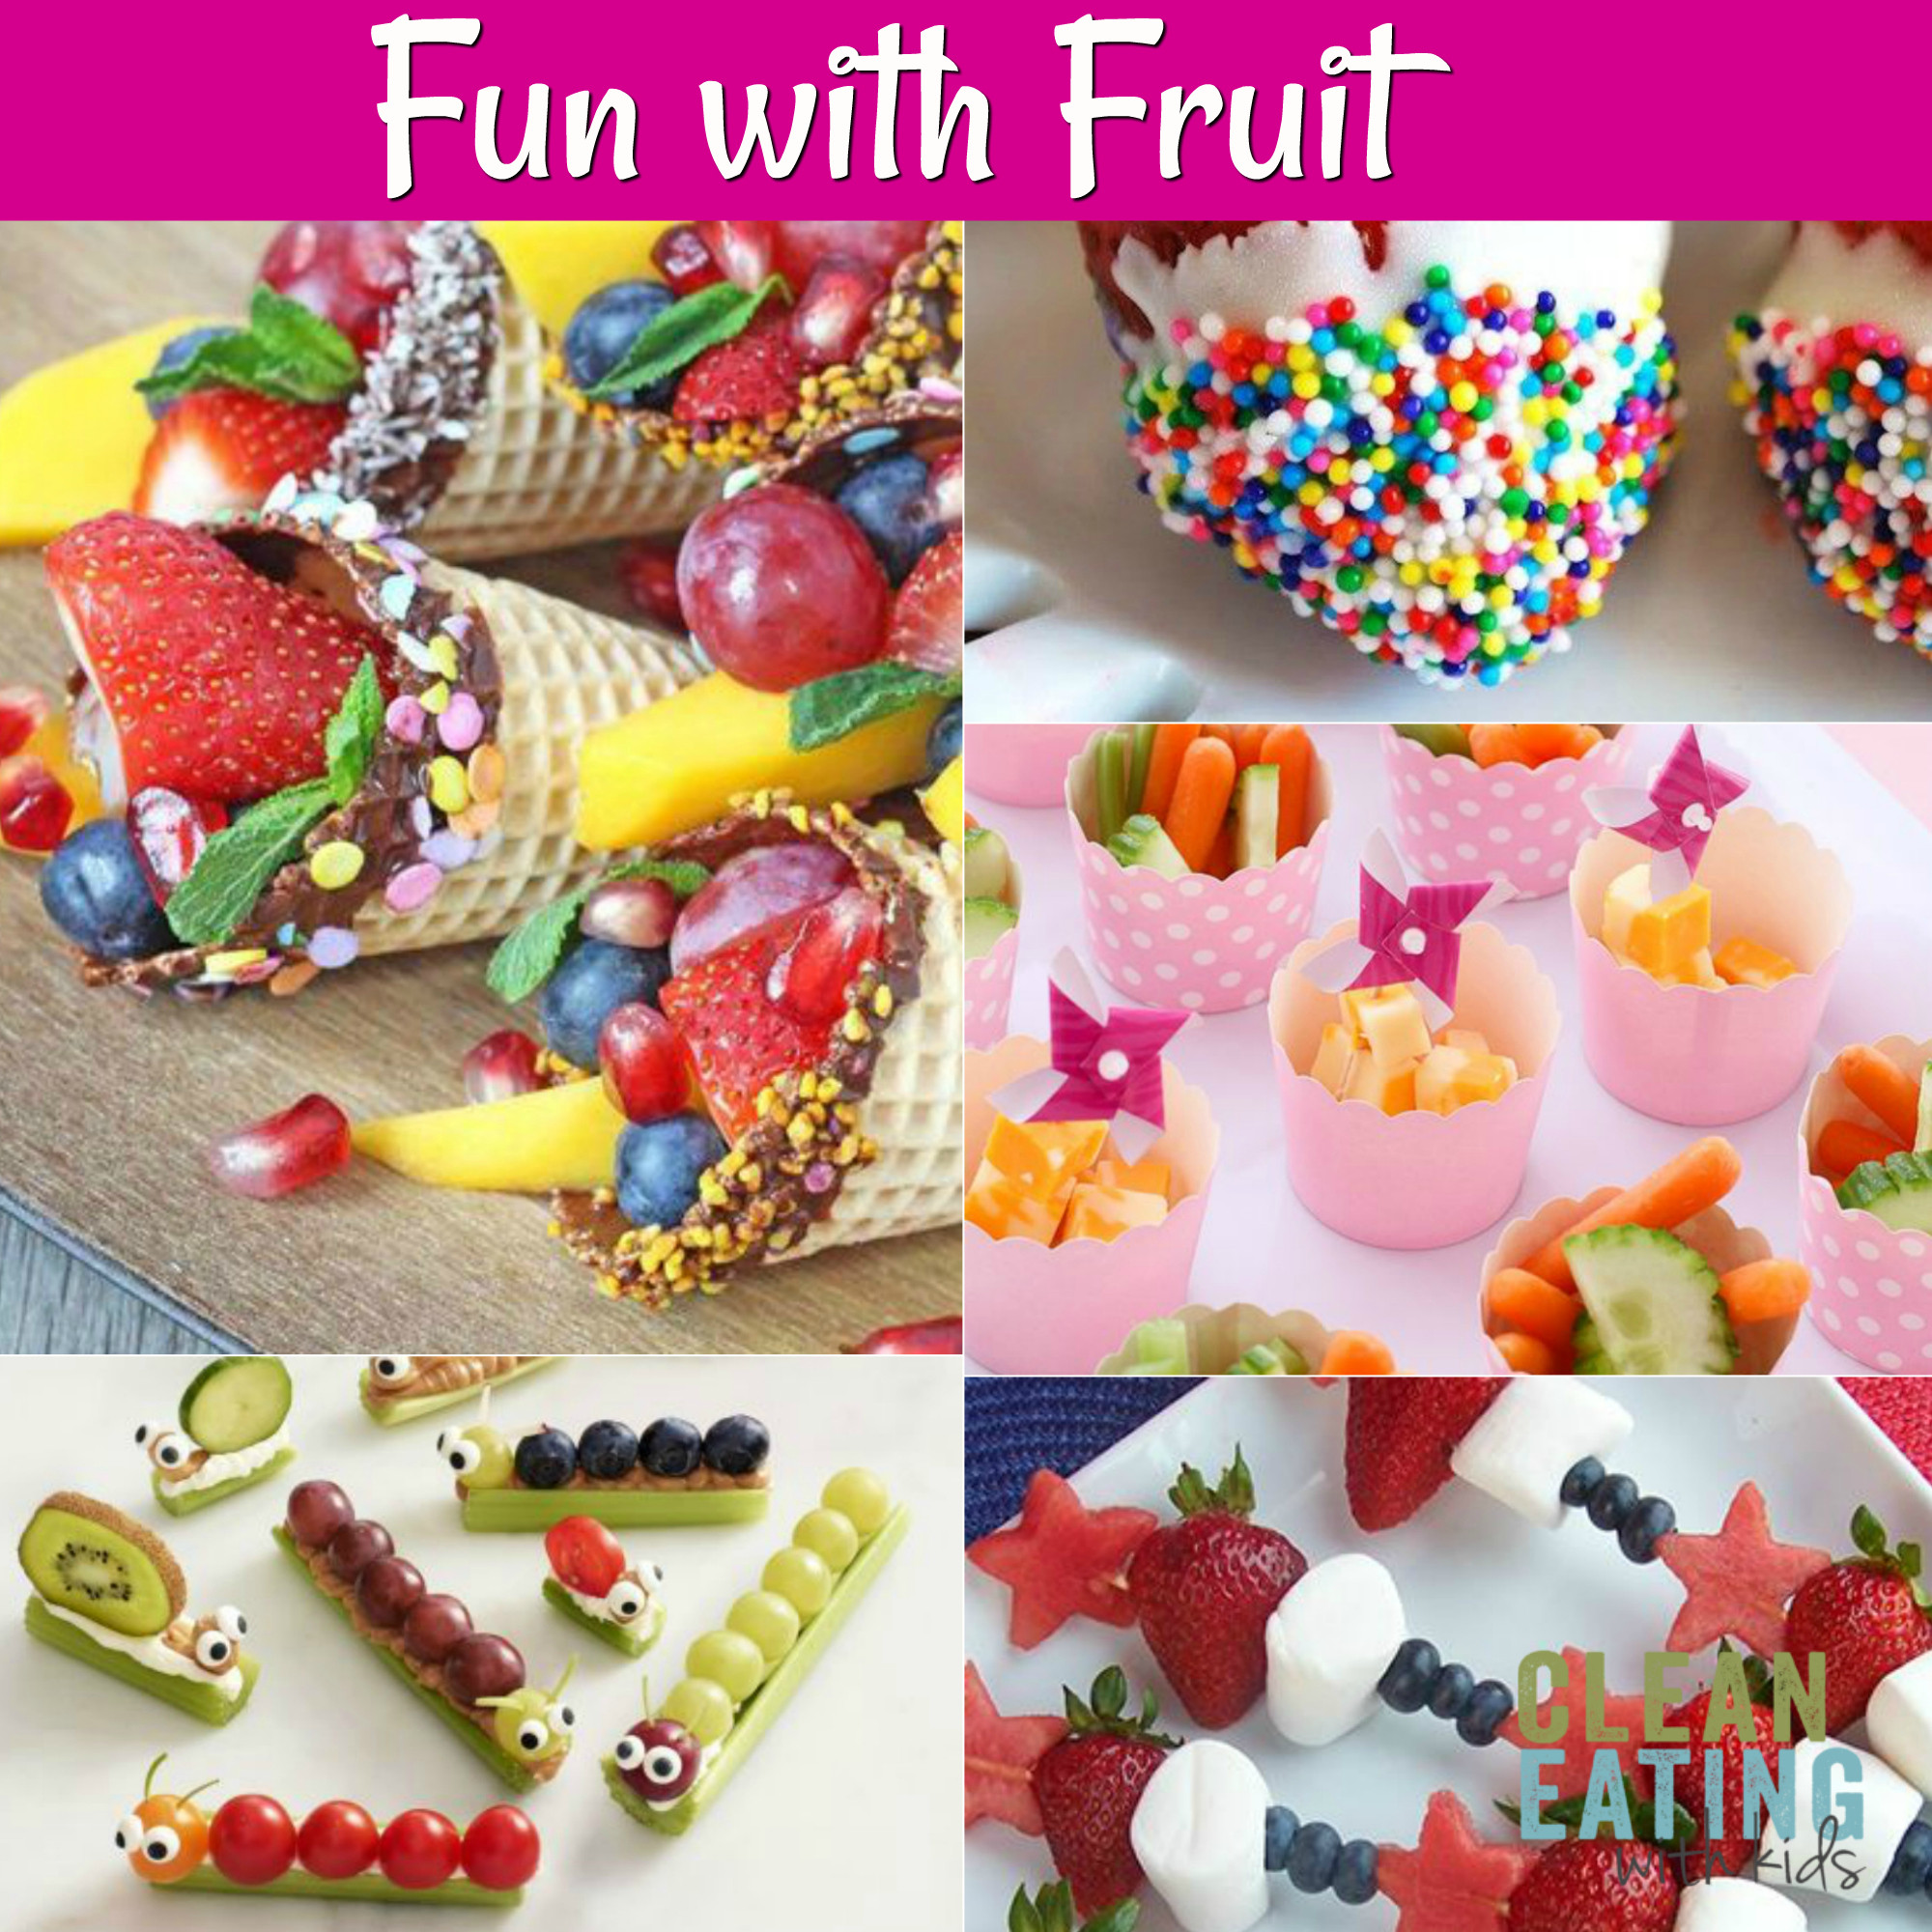 Kid Birthday Party Food
 25 Healthy Birthday Party Food Ideas Clean Eating with kids